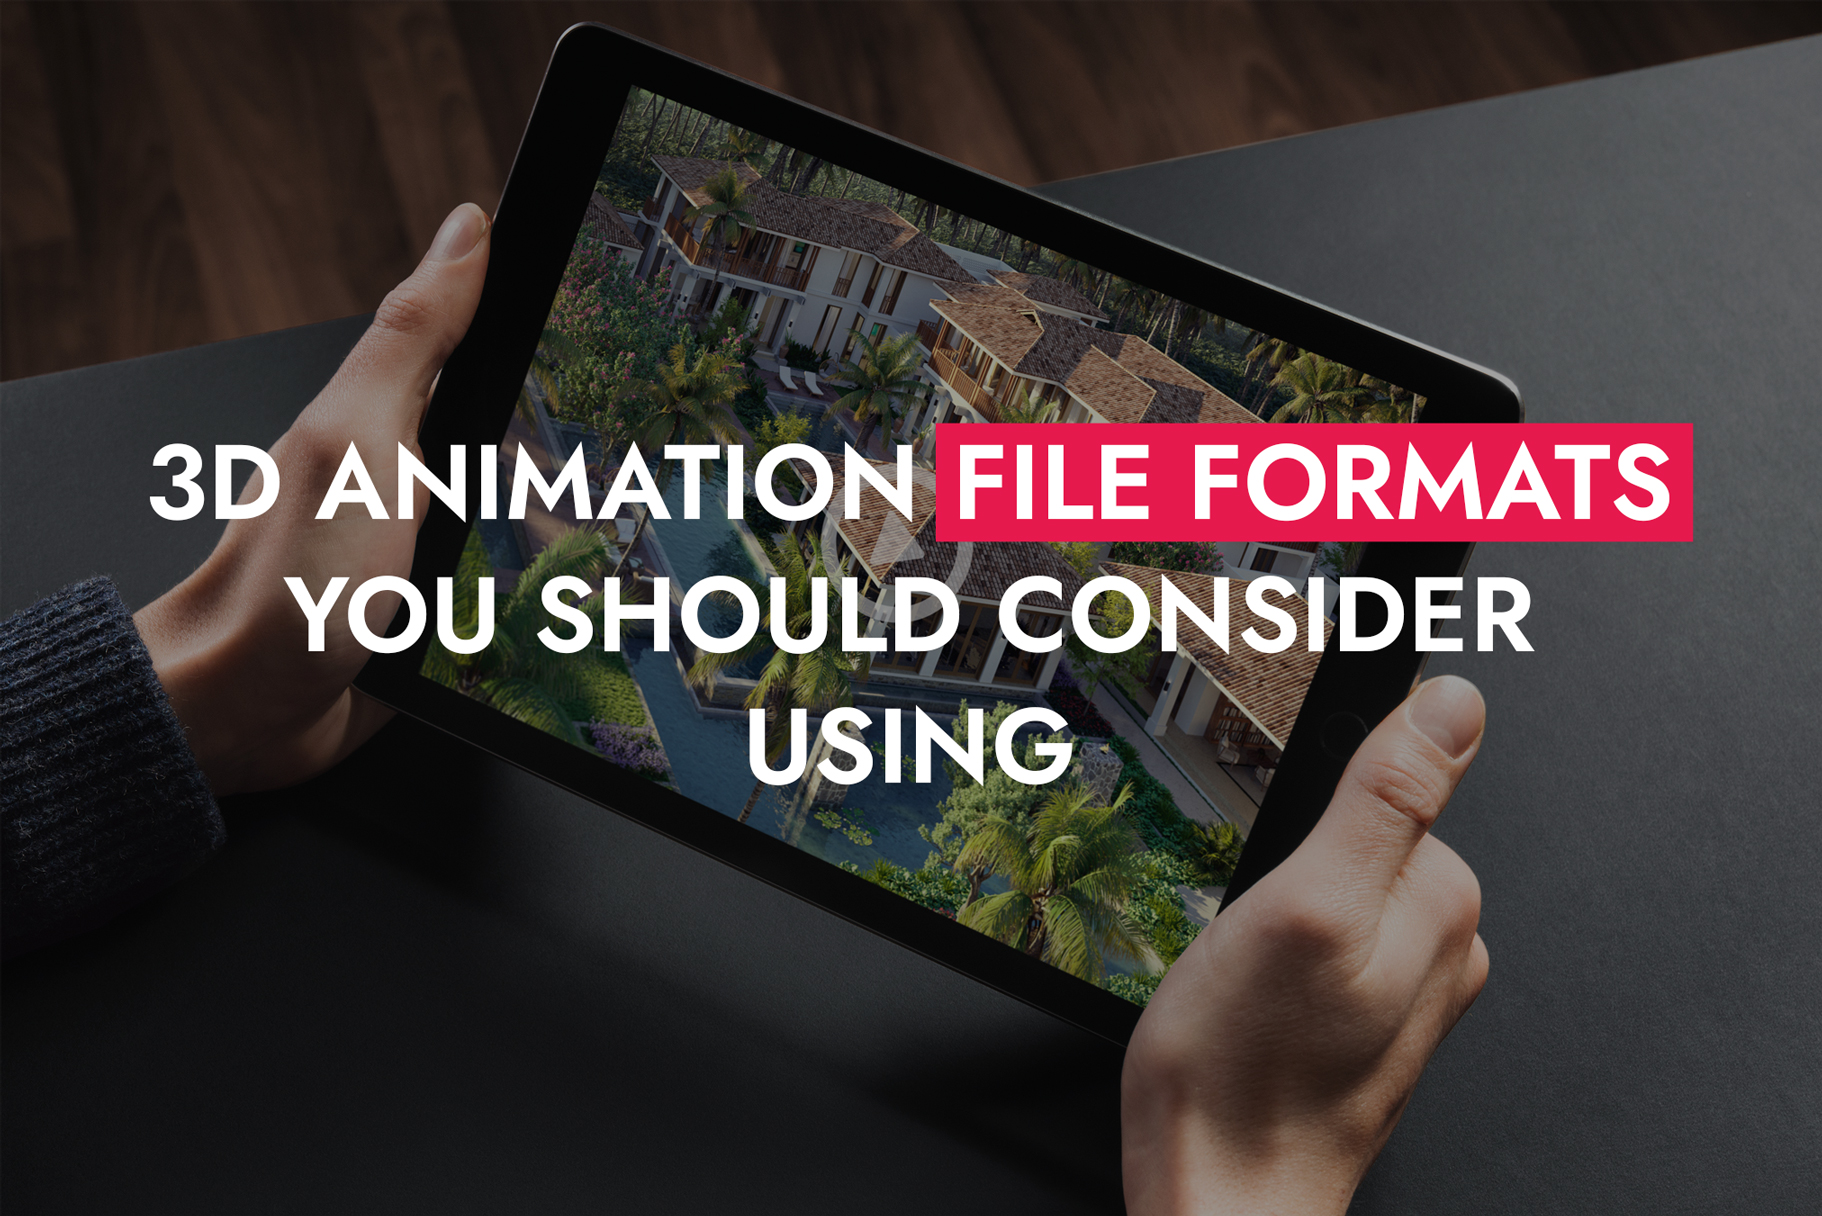 0010 04 22 3D Animation File Formats